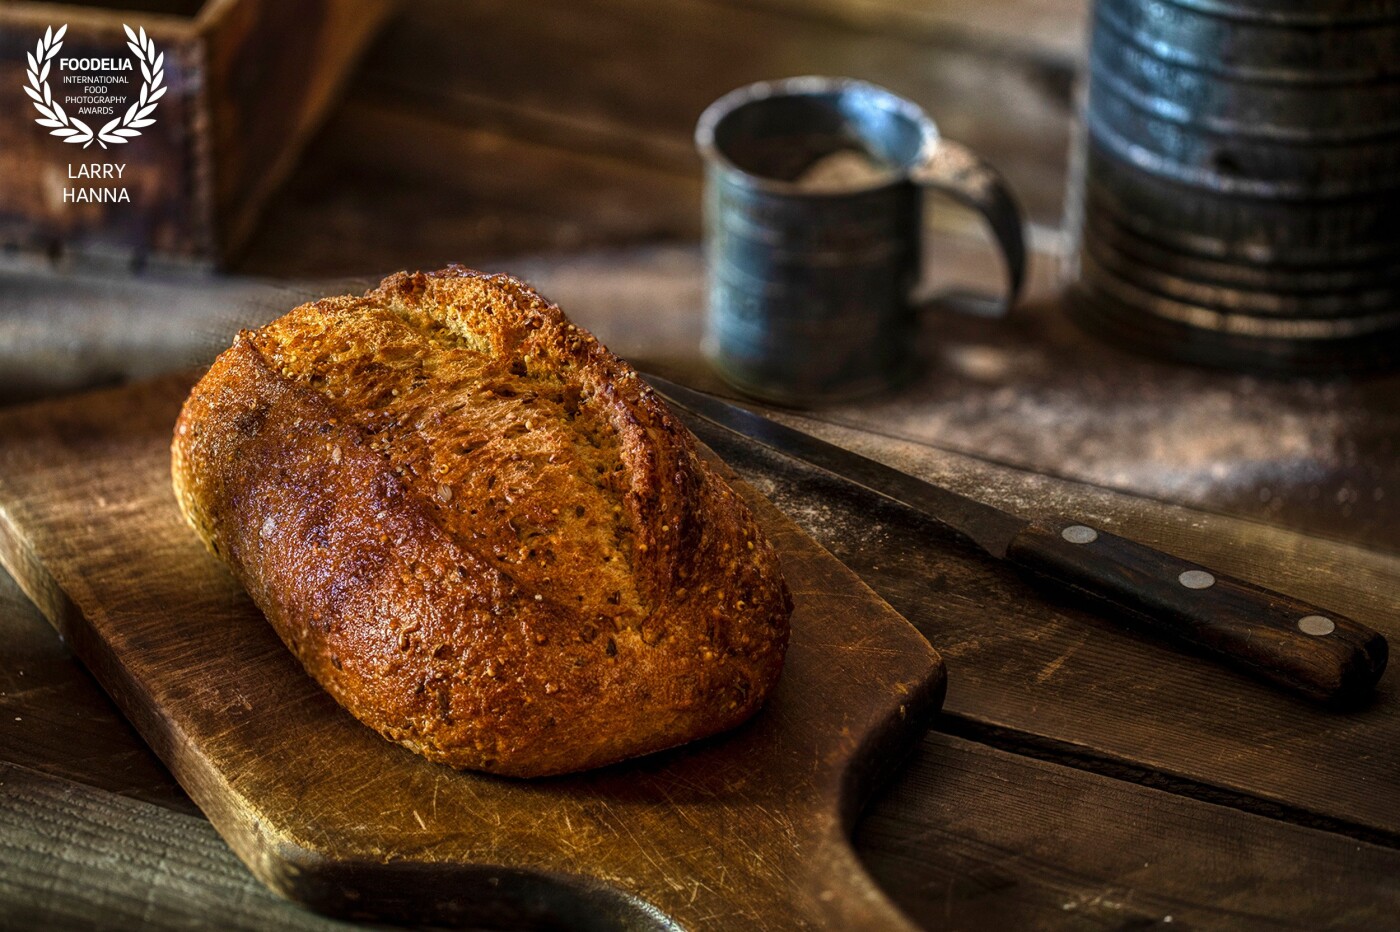 This image was created for my portfolio and my own creative enjoyment.  I created a set in my kitchen and photograph the bread using natural light.